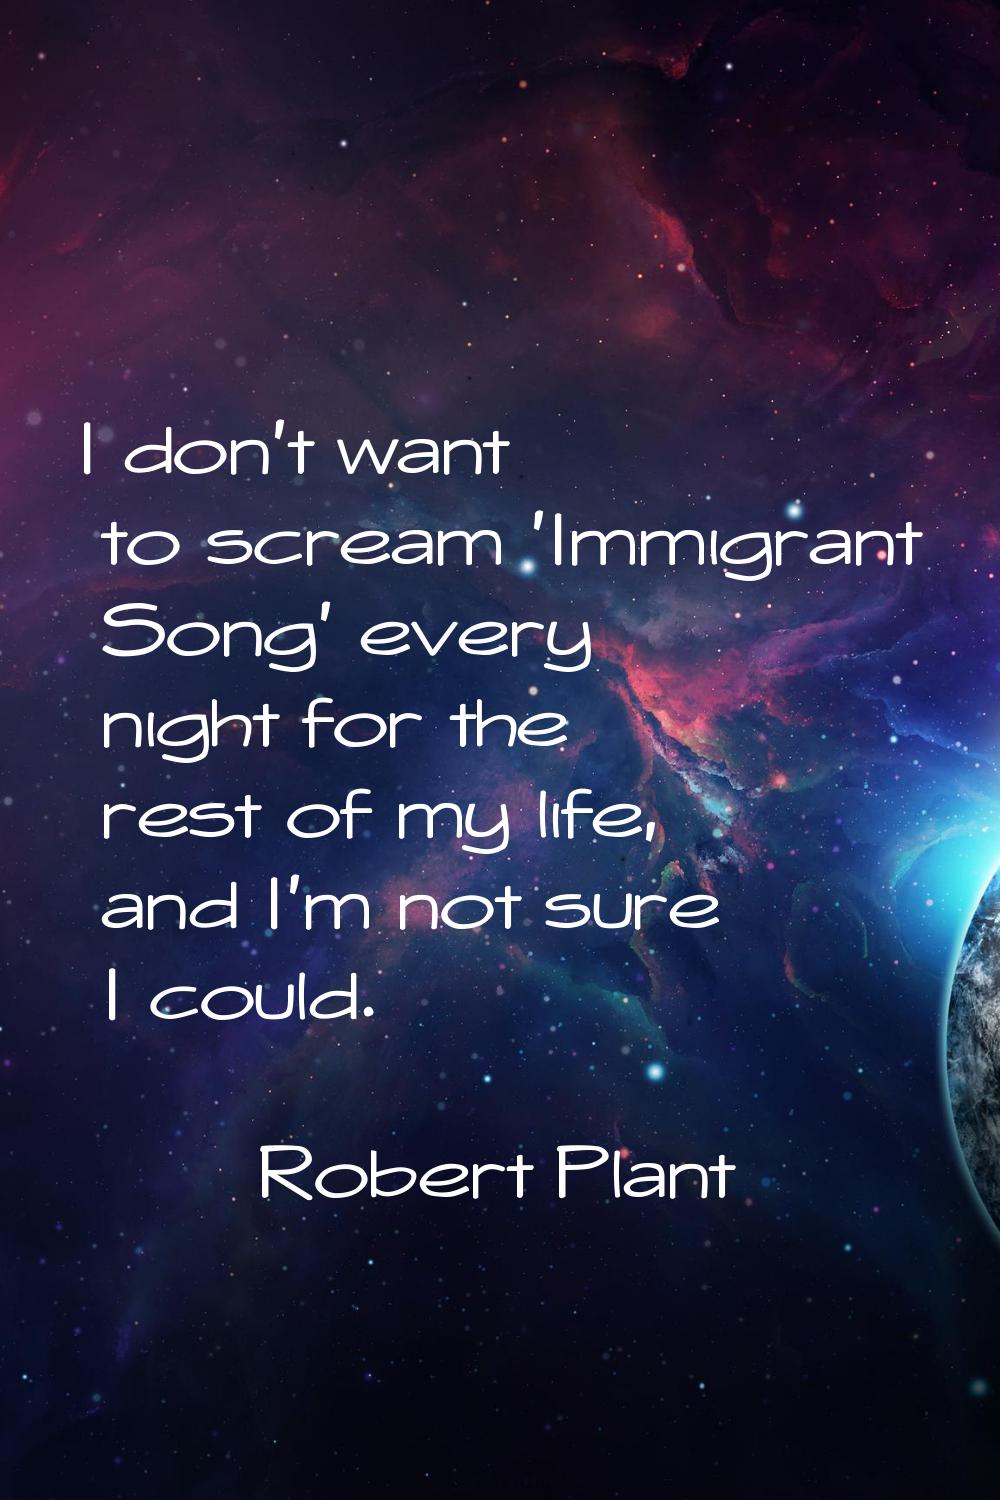 I don't want to scream 'Immigrant Song' every night for the rest of my life, and I'm not sure I cou